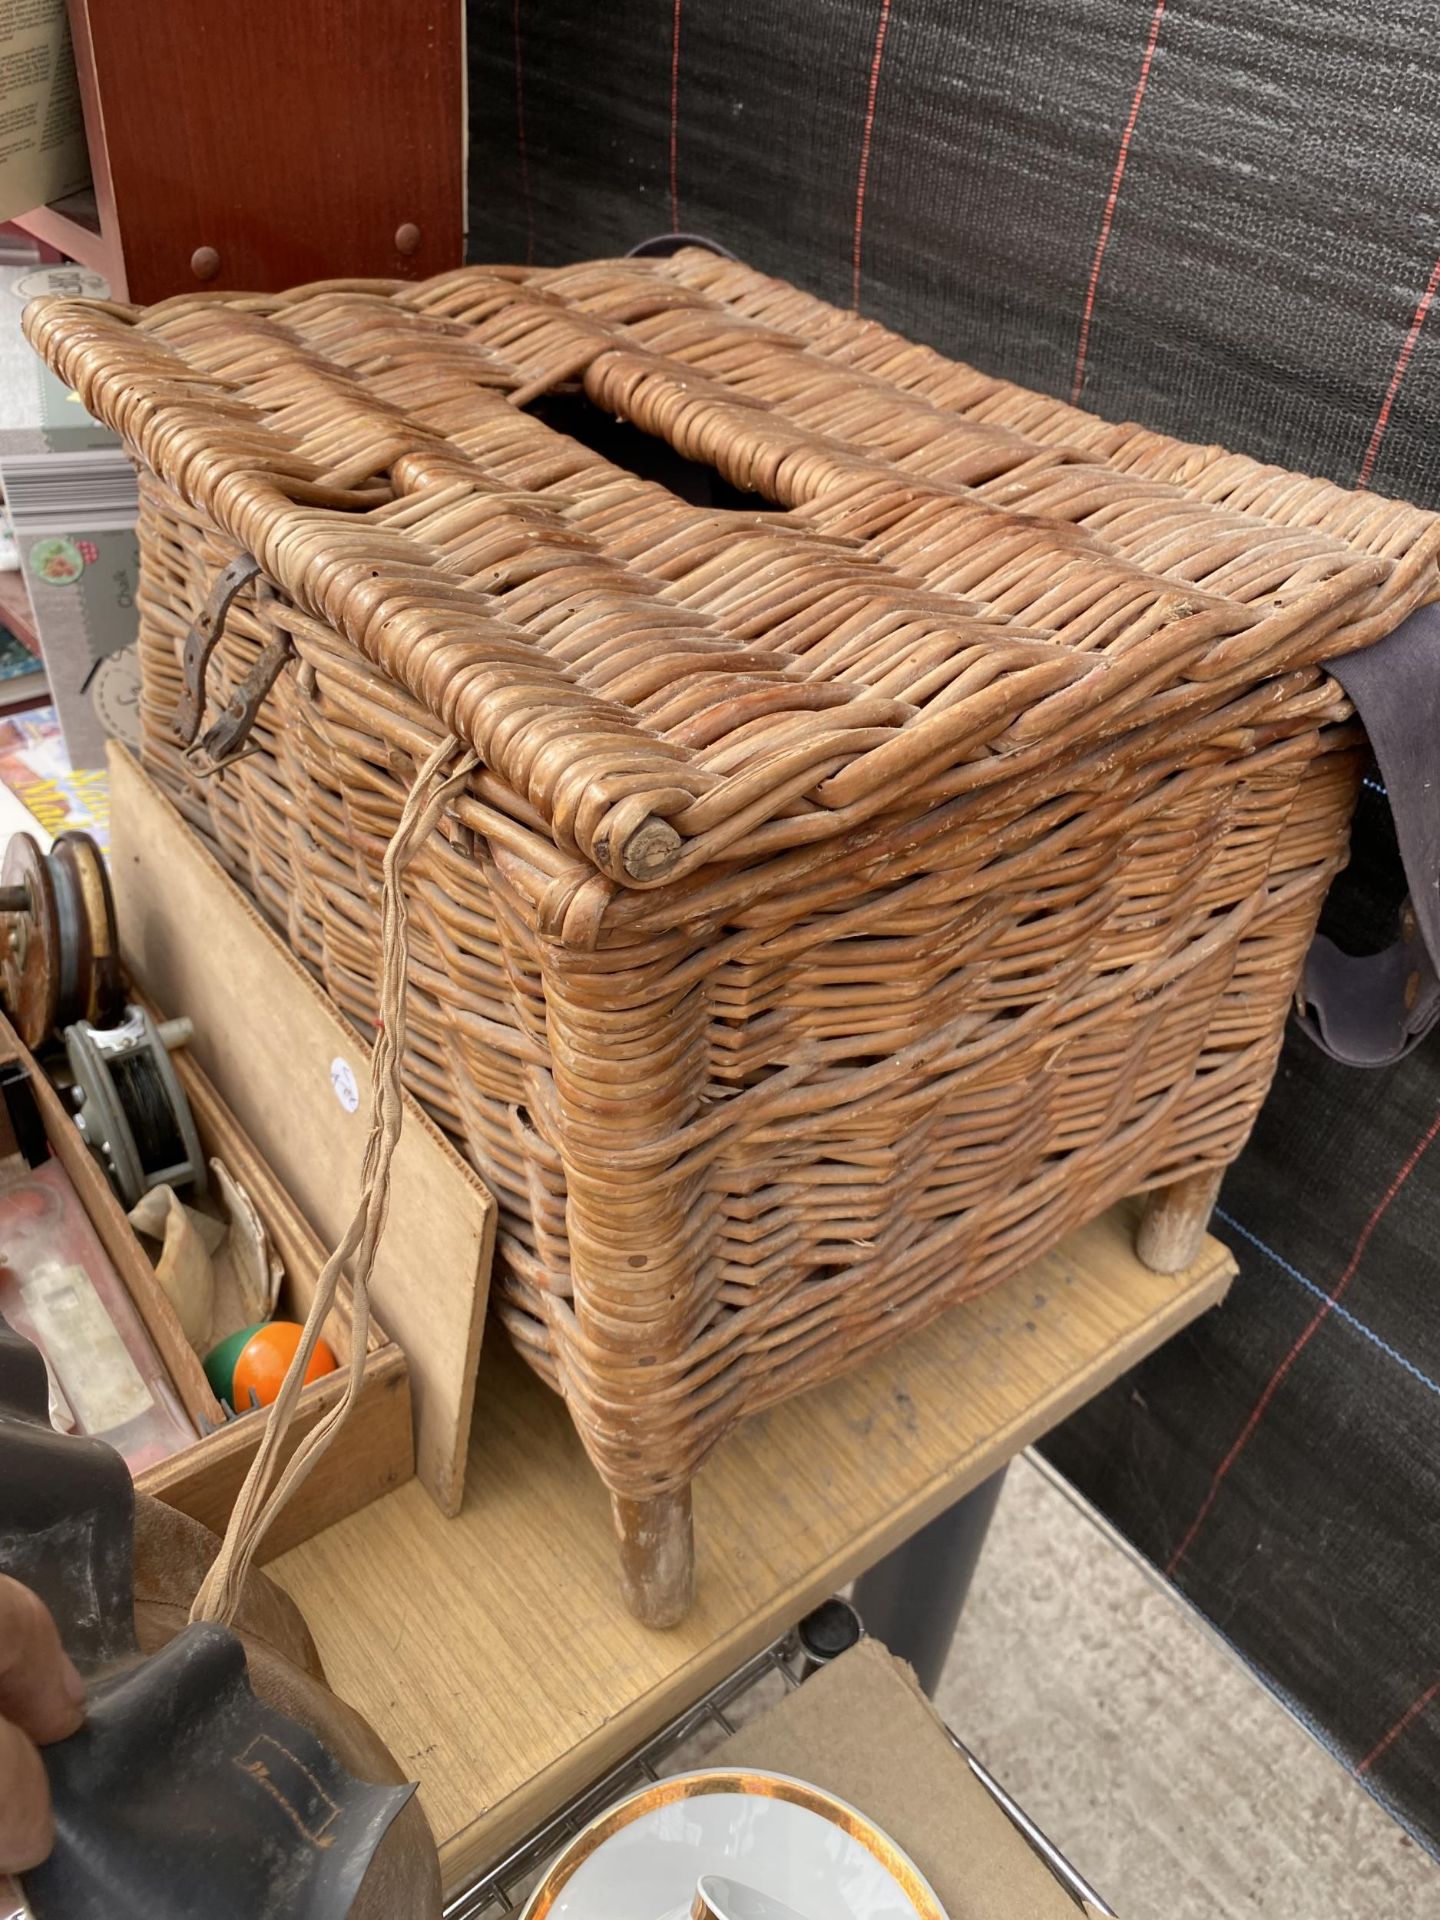 AN ASSORTMENT OF VINTAGE FISHING TACKLE TO INCLUDE A WICKER TACKLE BASKET, REELS AND FLOATS ETC - Image 2 of 8